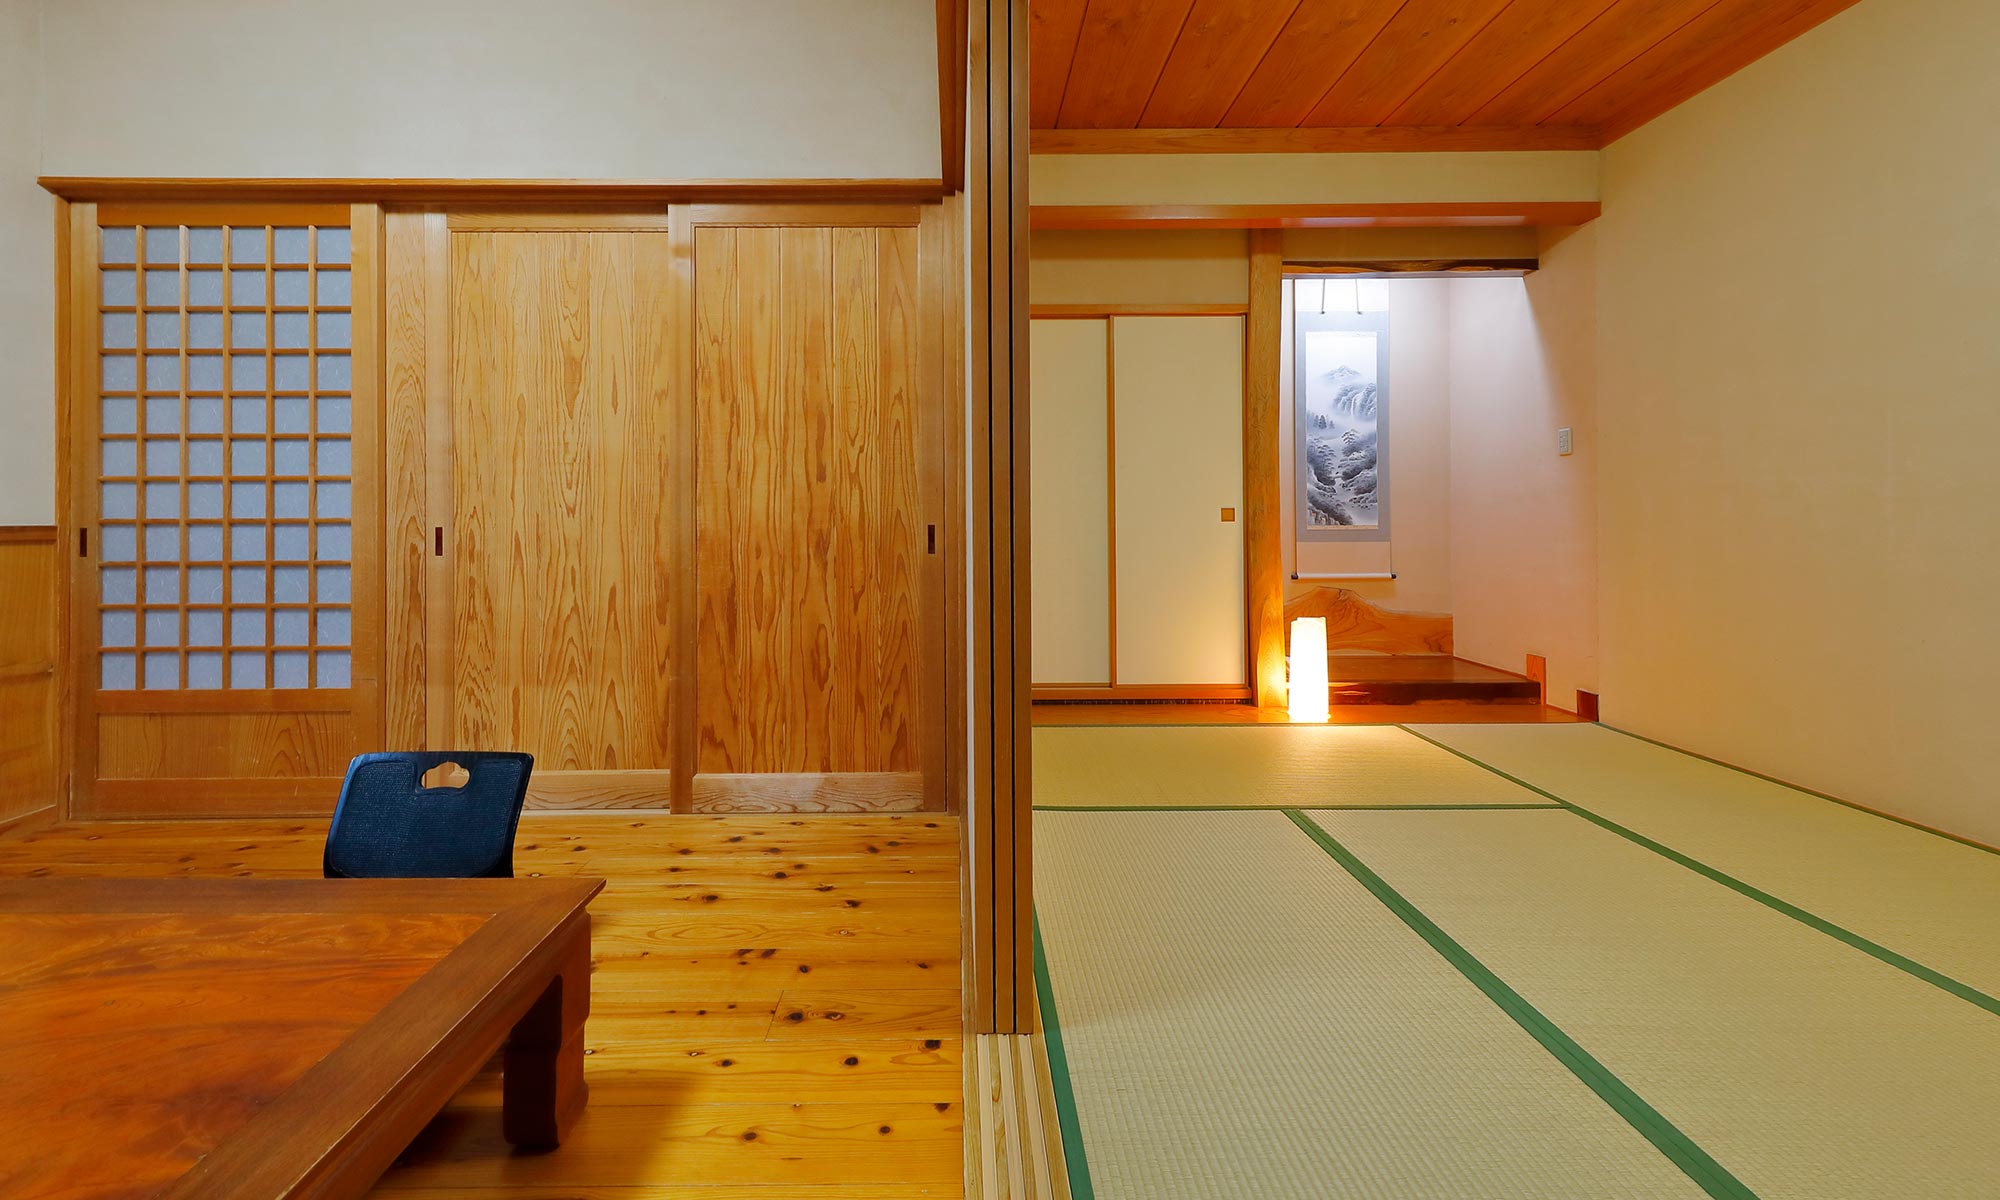 4.5 tatami mats in the antechamber and Japanese-style room